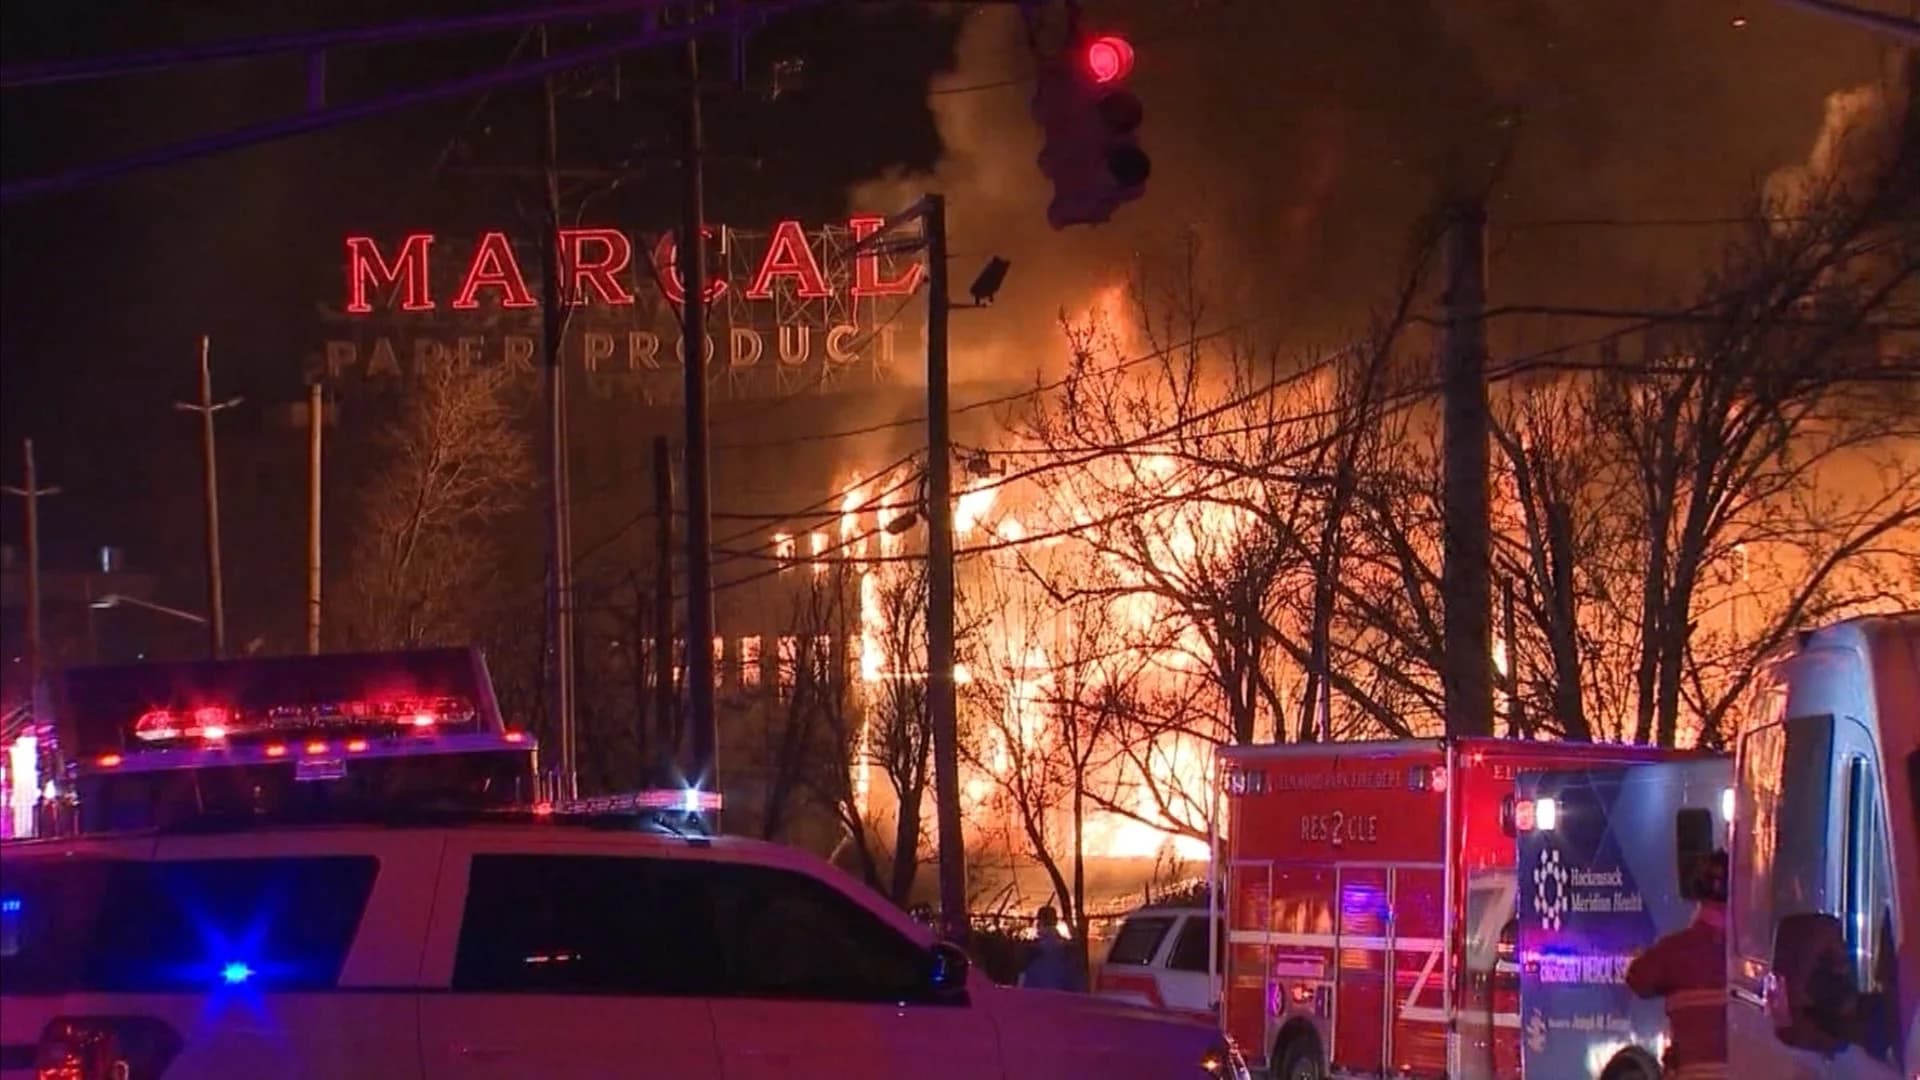 Marcal Paper Mill fire cleanup expected to begin Monday